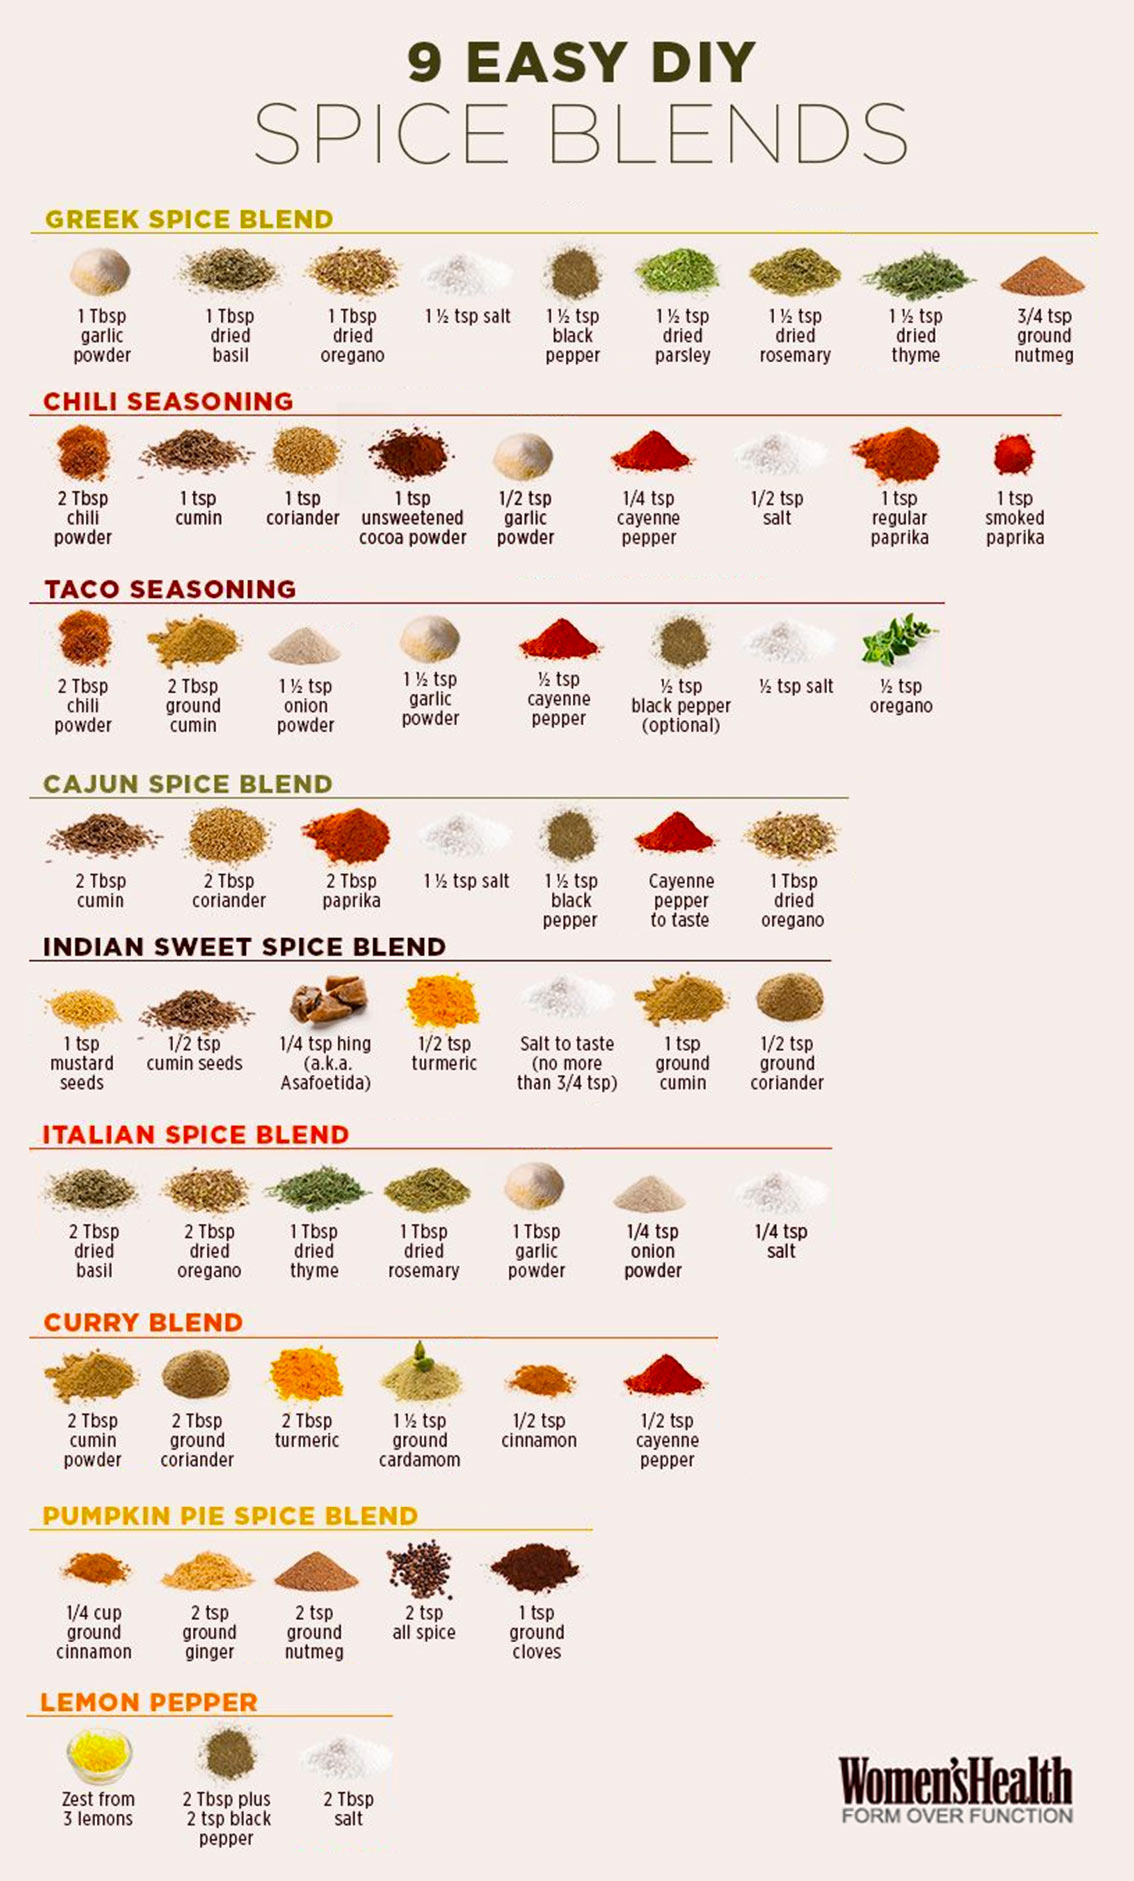 Easy Homemade Spice Blends - Cooking Infographic